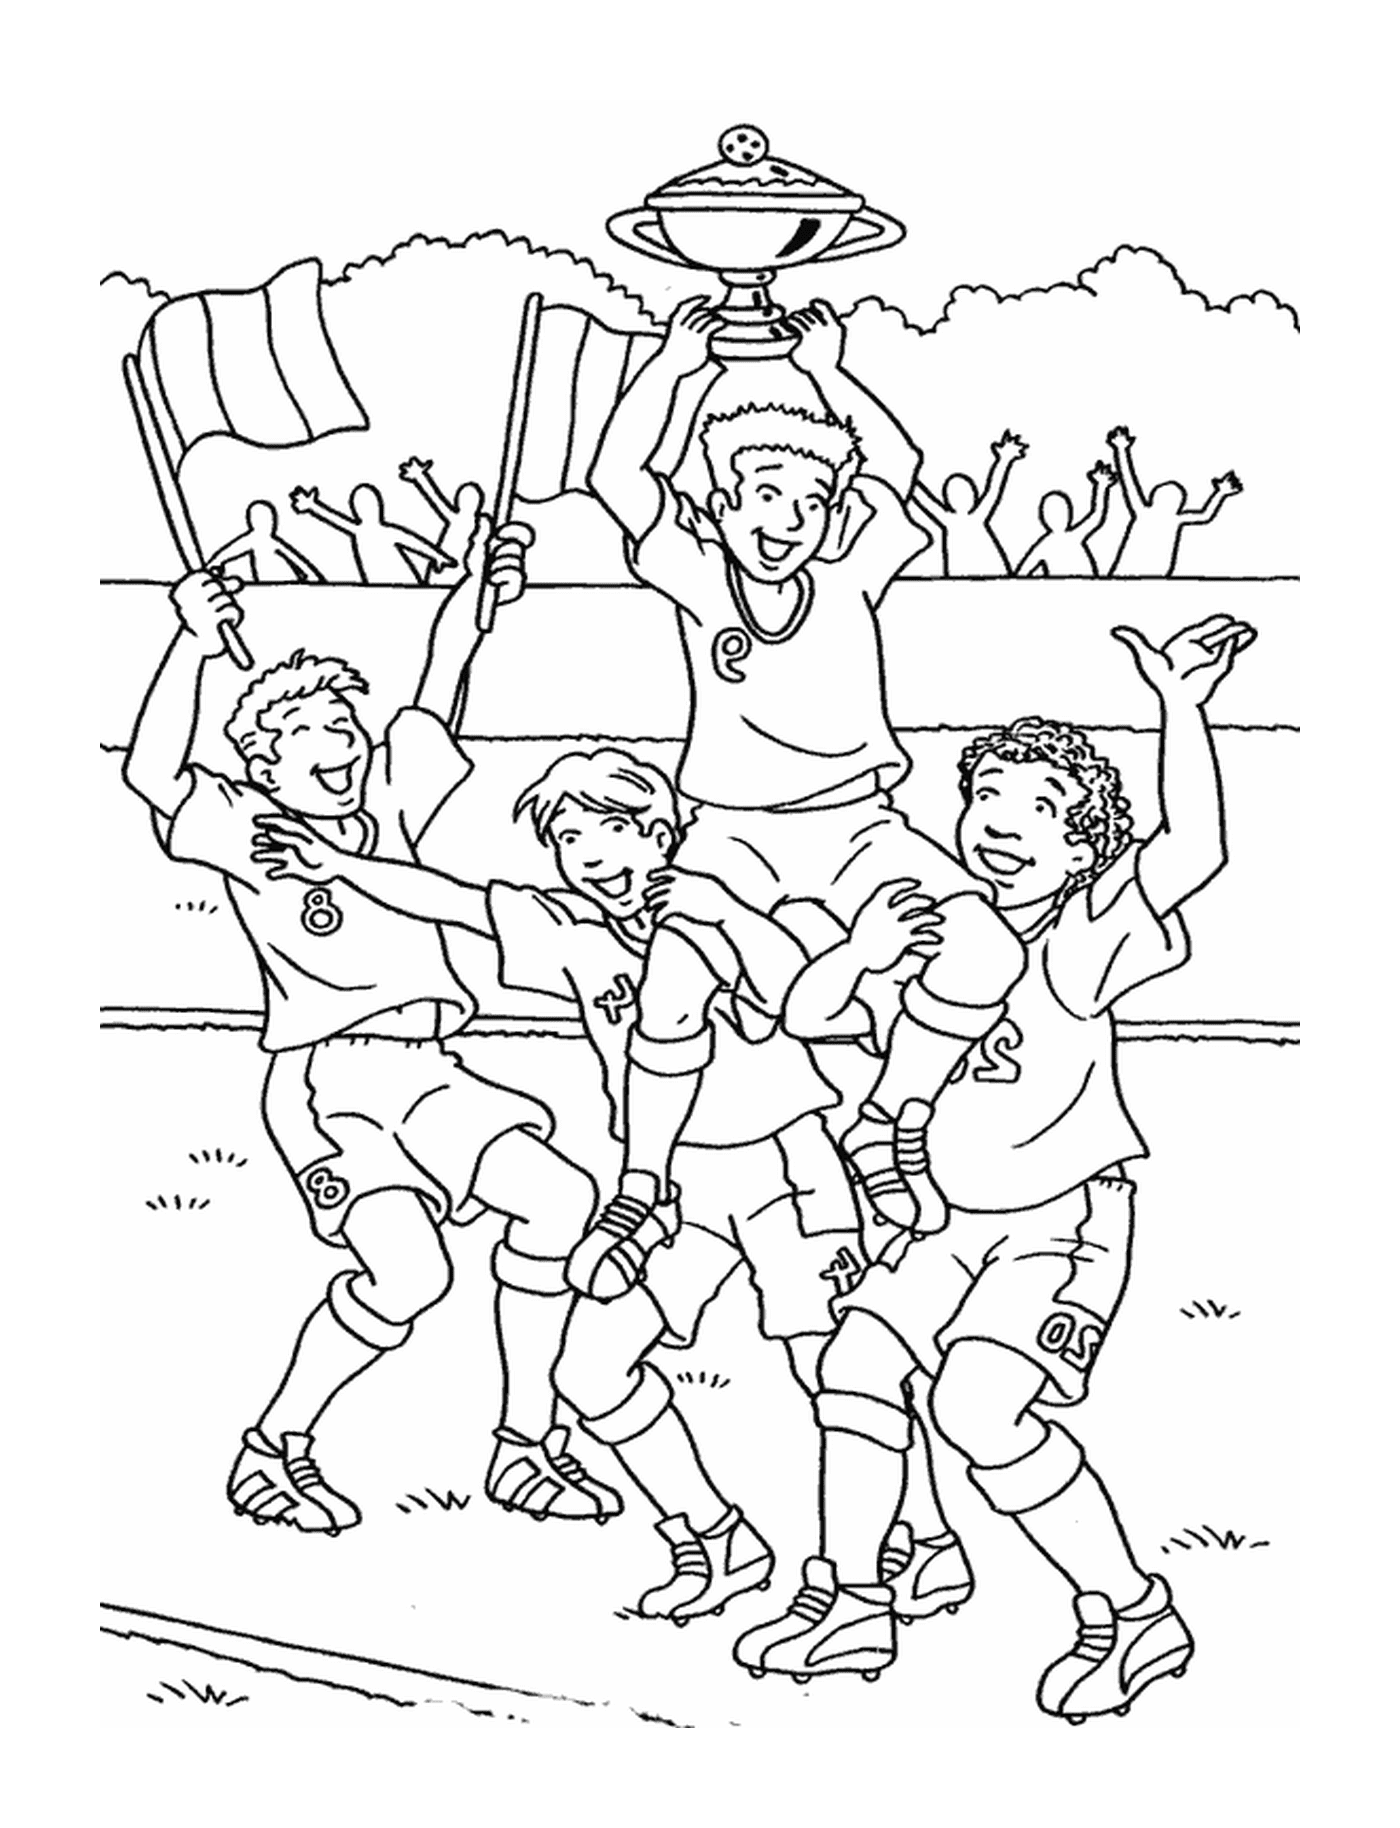 coloriage sport foot equipe victoire